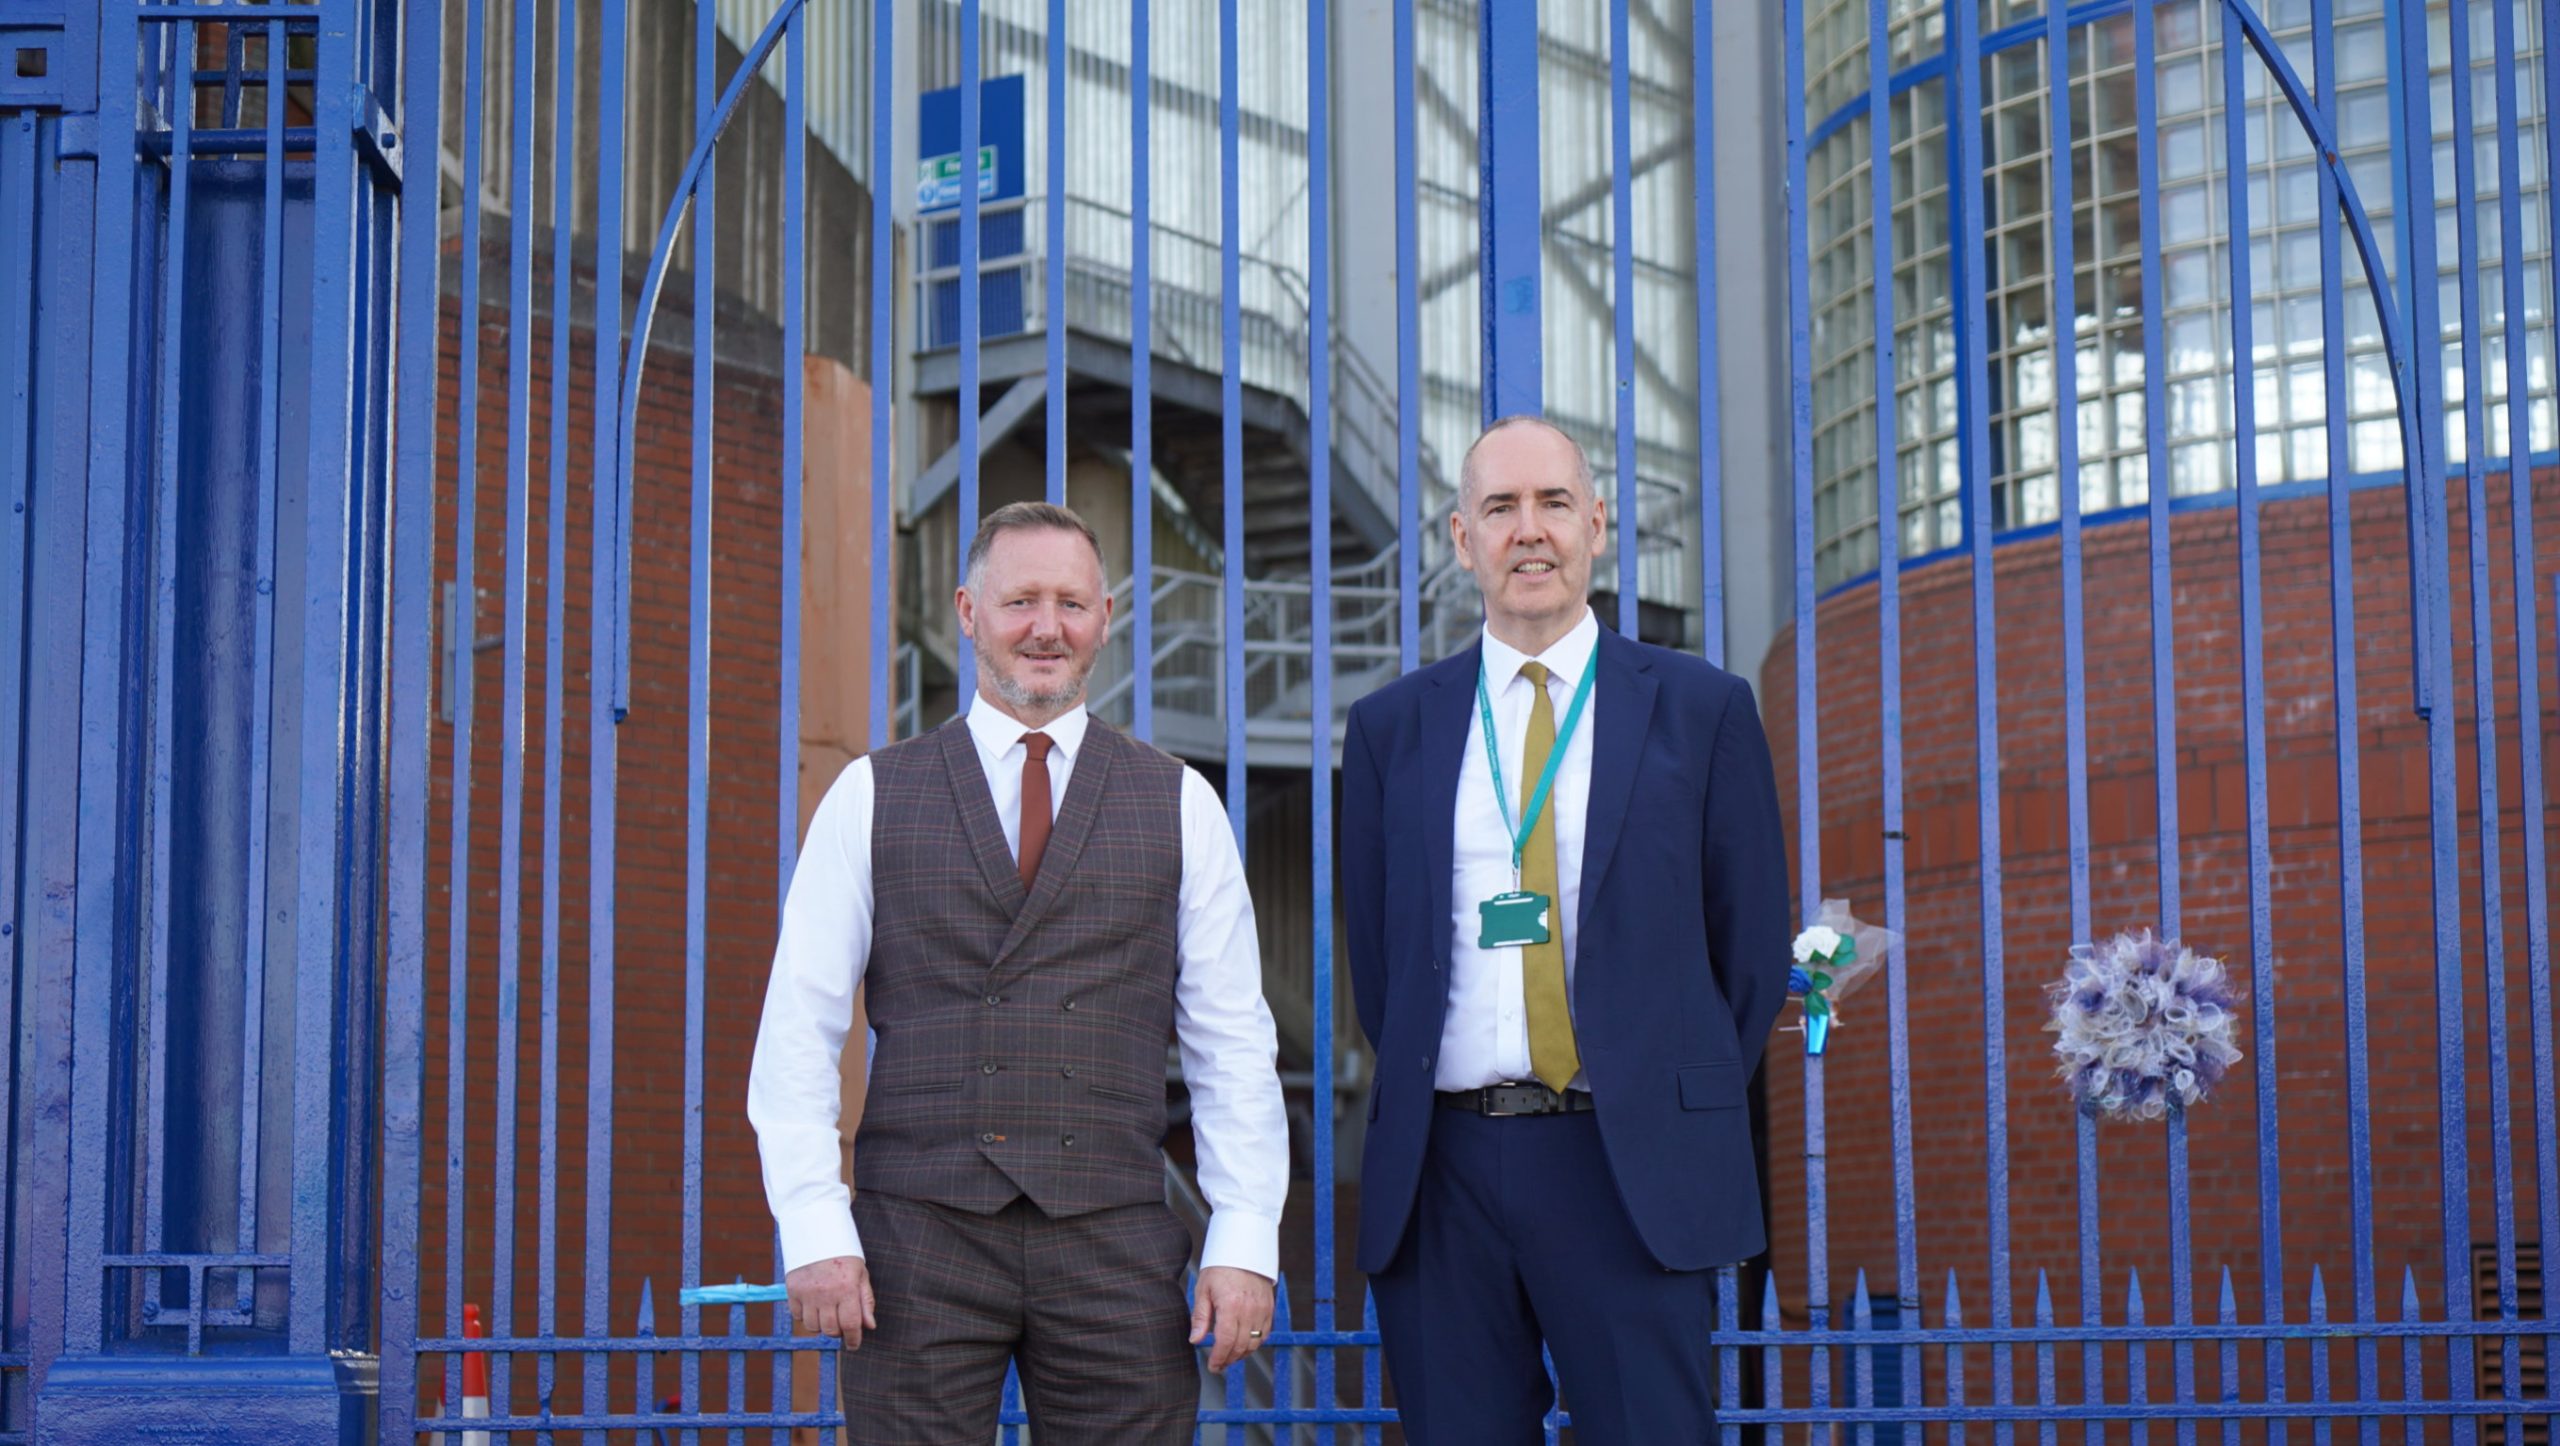 Foundation Welcomes Executive Director Of Education For Glasgow City Council To Ibrox